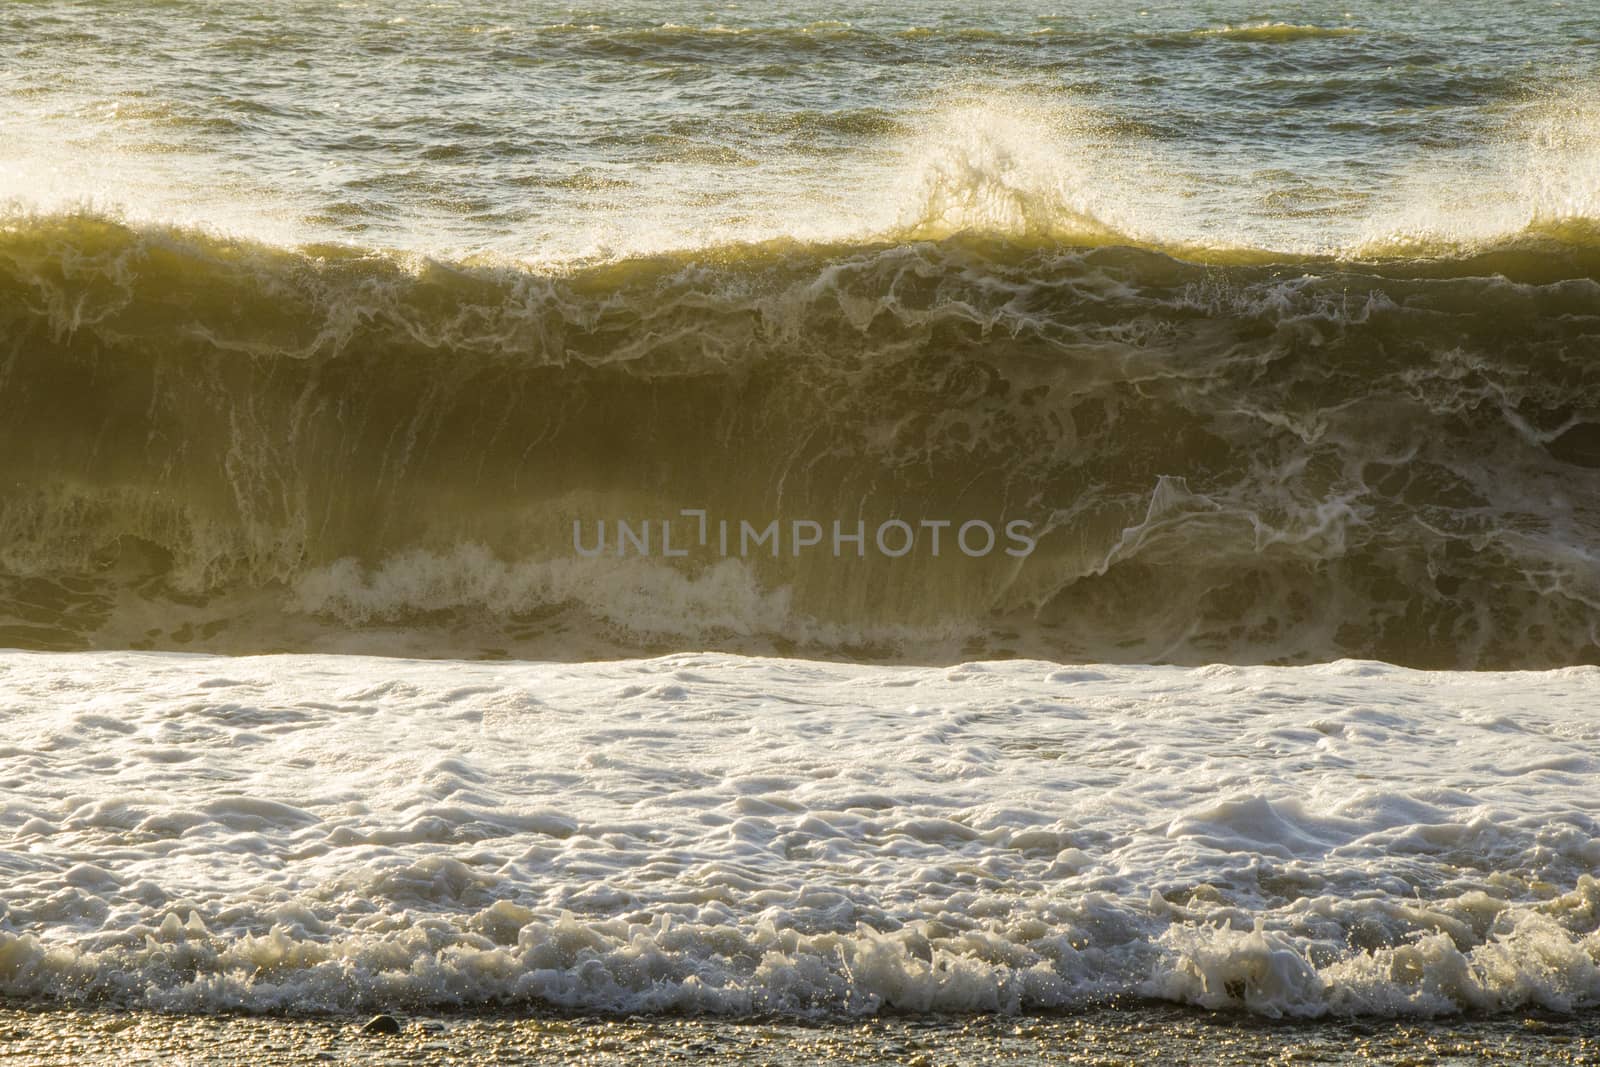 Stormy Black sea. Water background, stormy weather, waves and splashes in Batumi, Georgia. by Taidundua